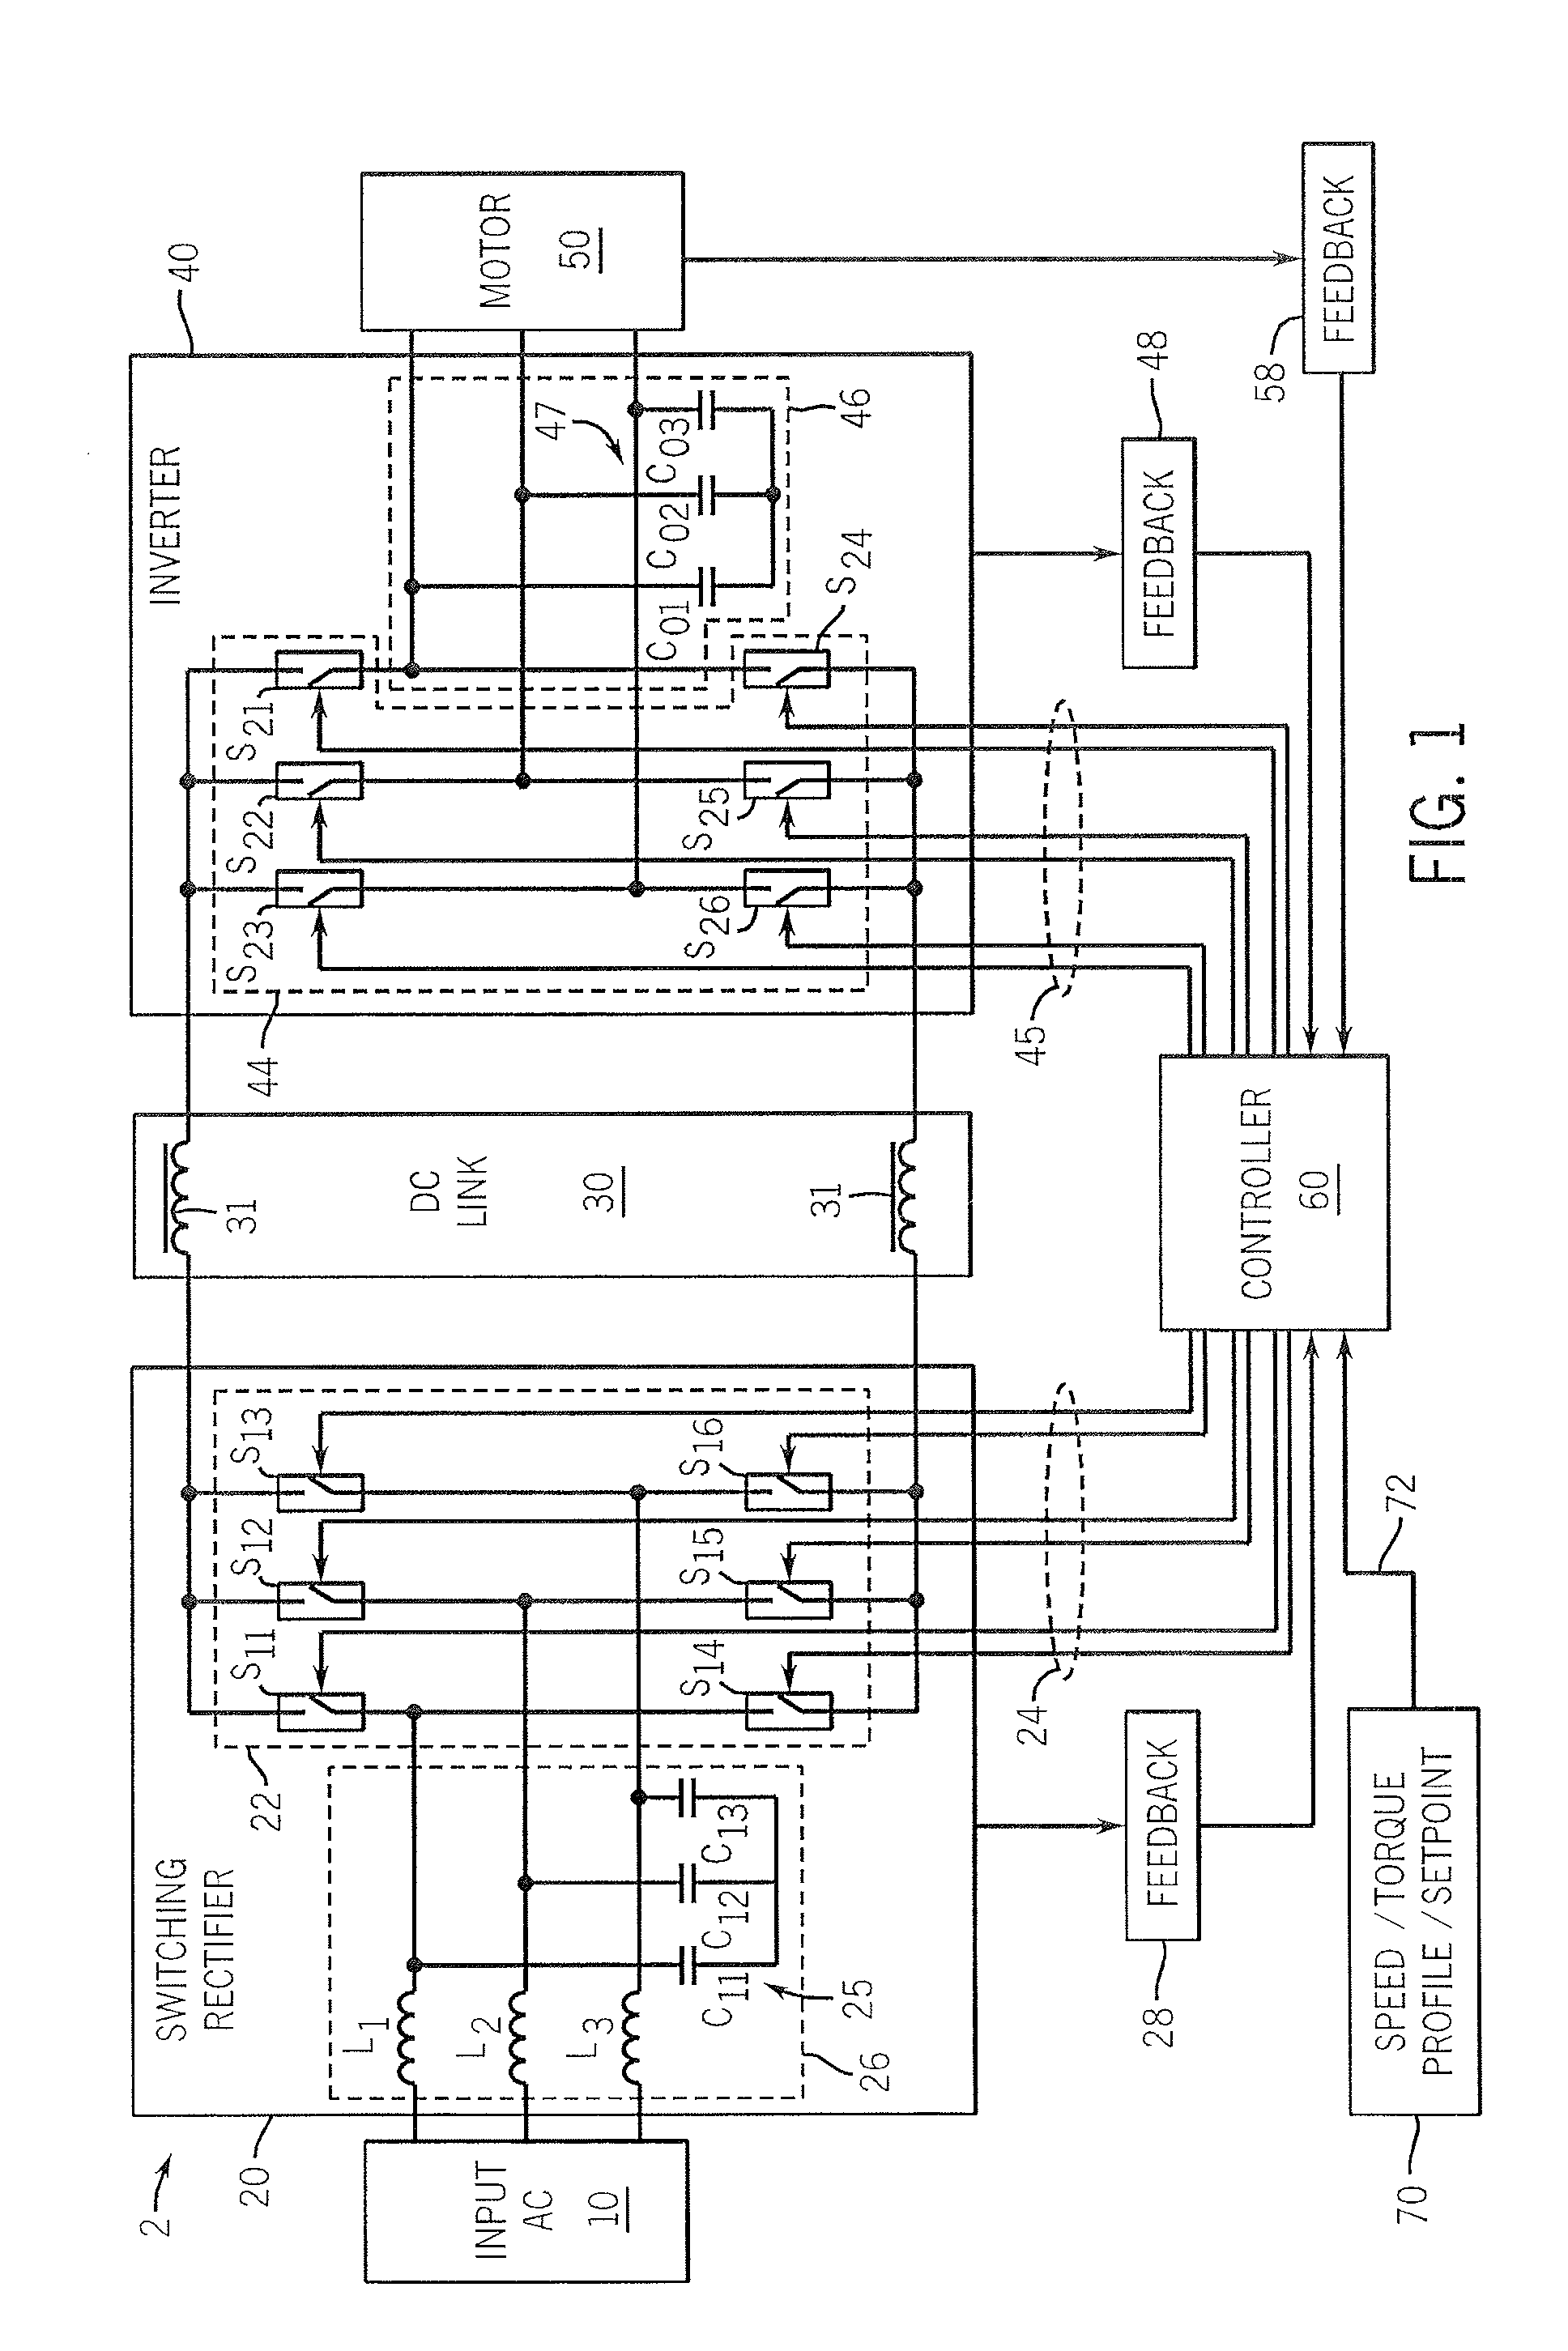 Motor drive using flux adjustment to control power factor